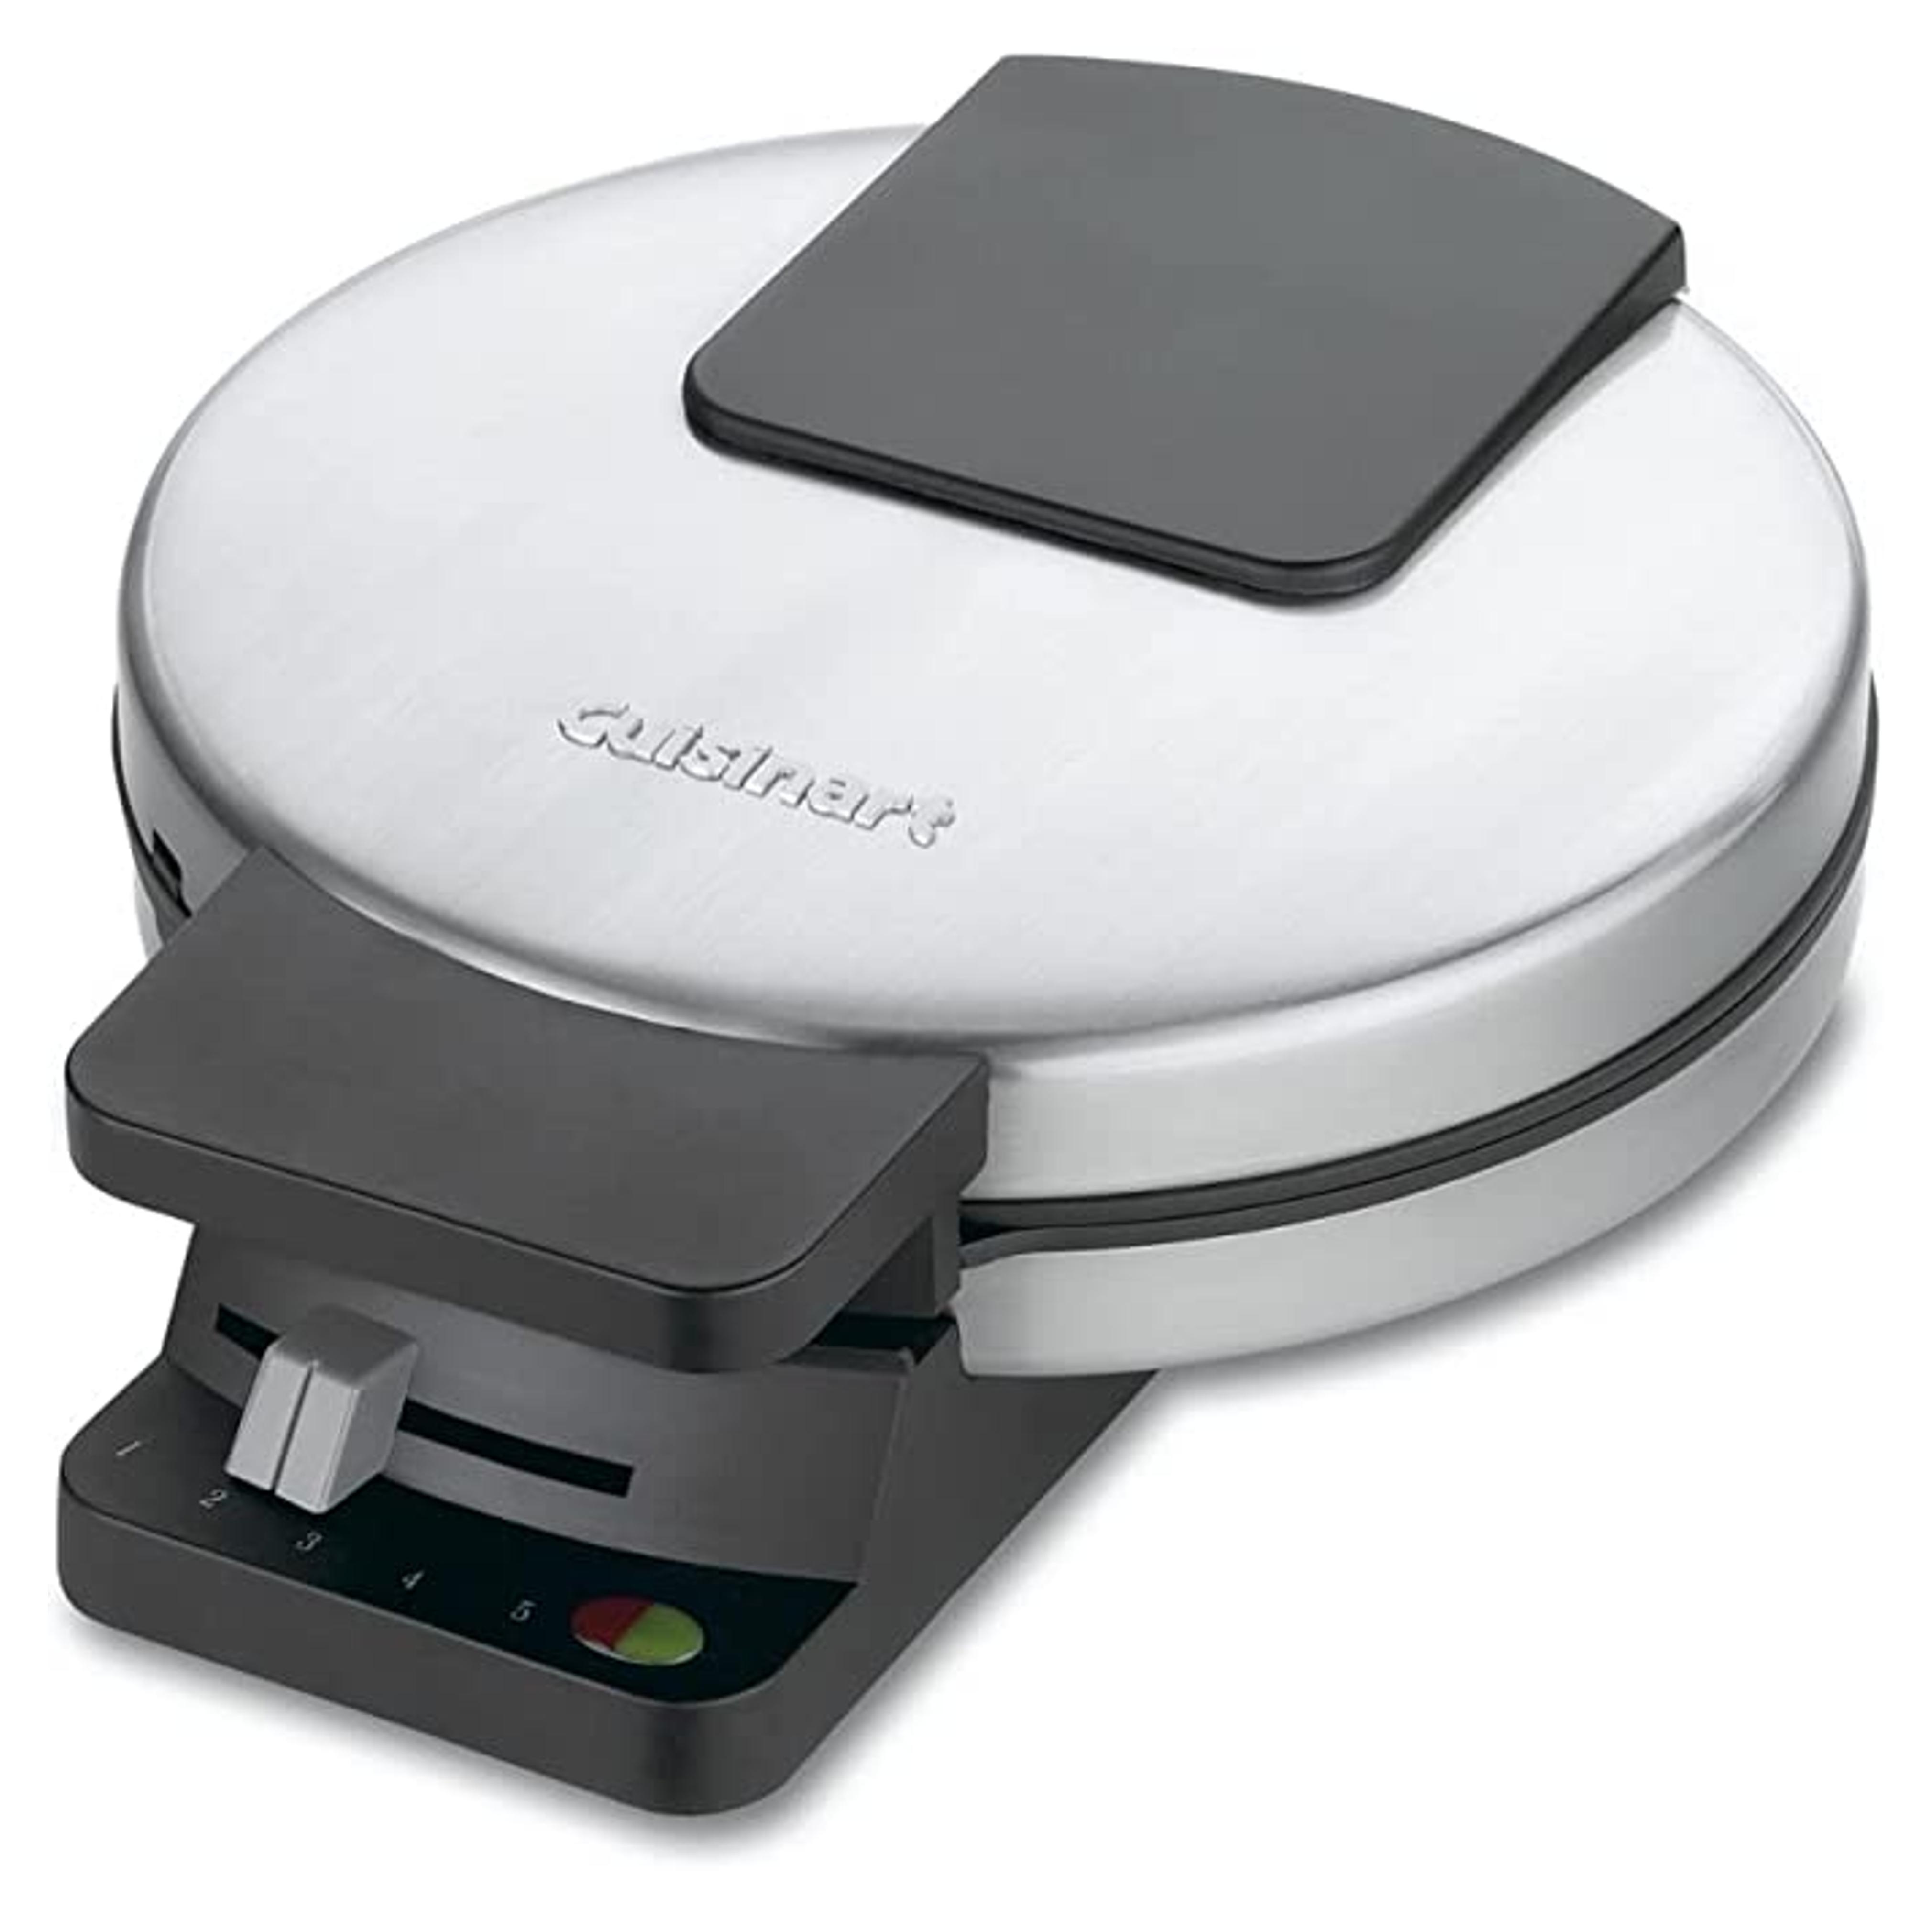 Amazon.com: Cuisinart Classic Waffle Maker, Round, Silver: Electric Waffle Irons: Home & Kitchen